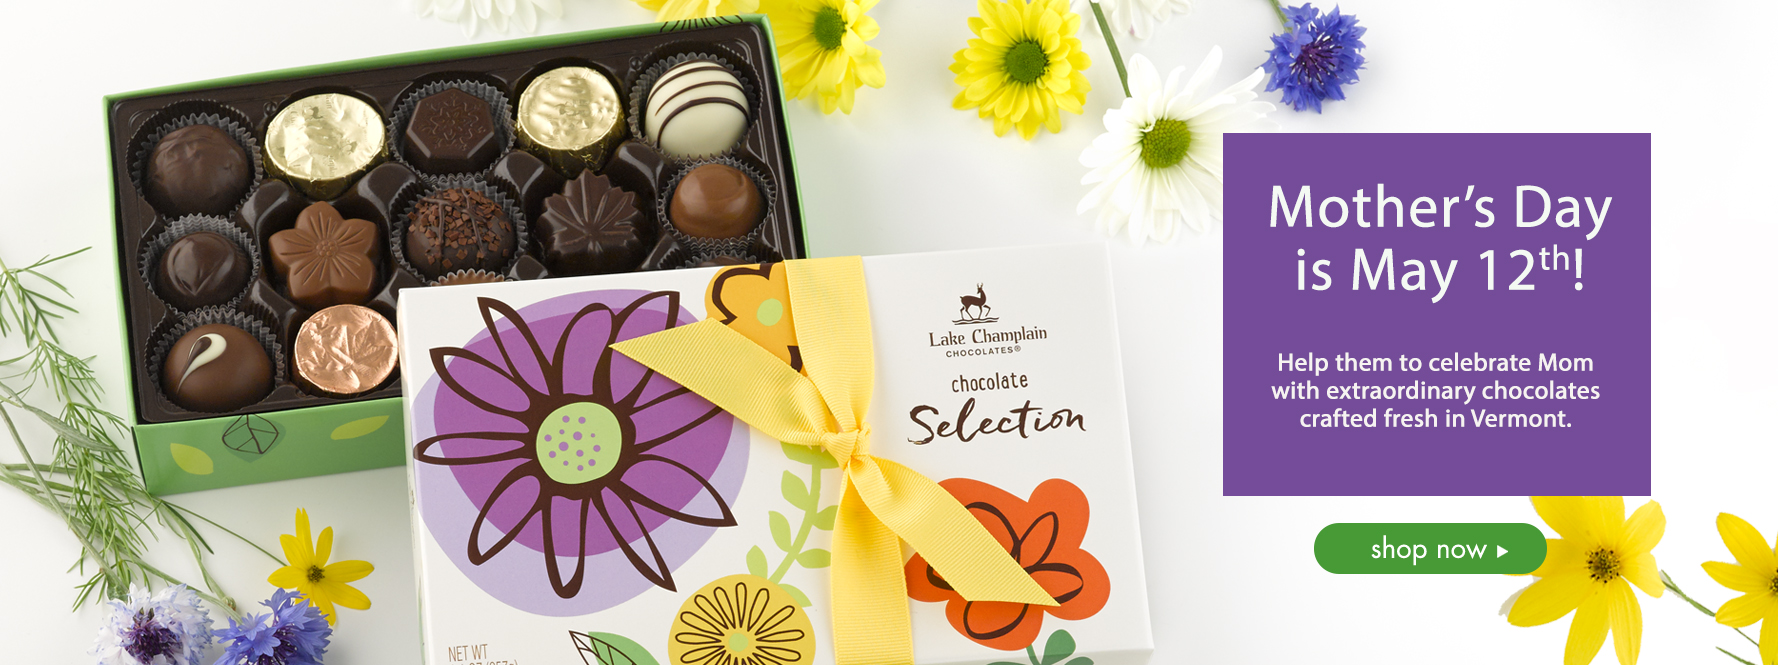 Order Mother's Day Chocolates now